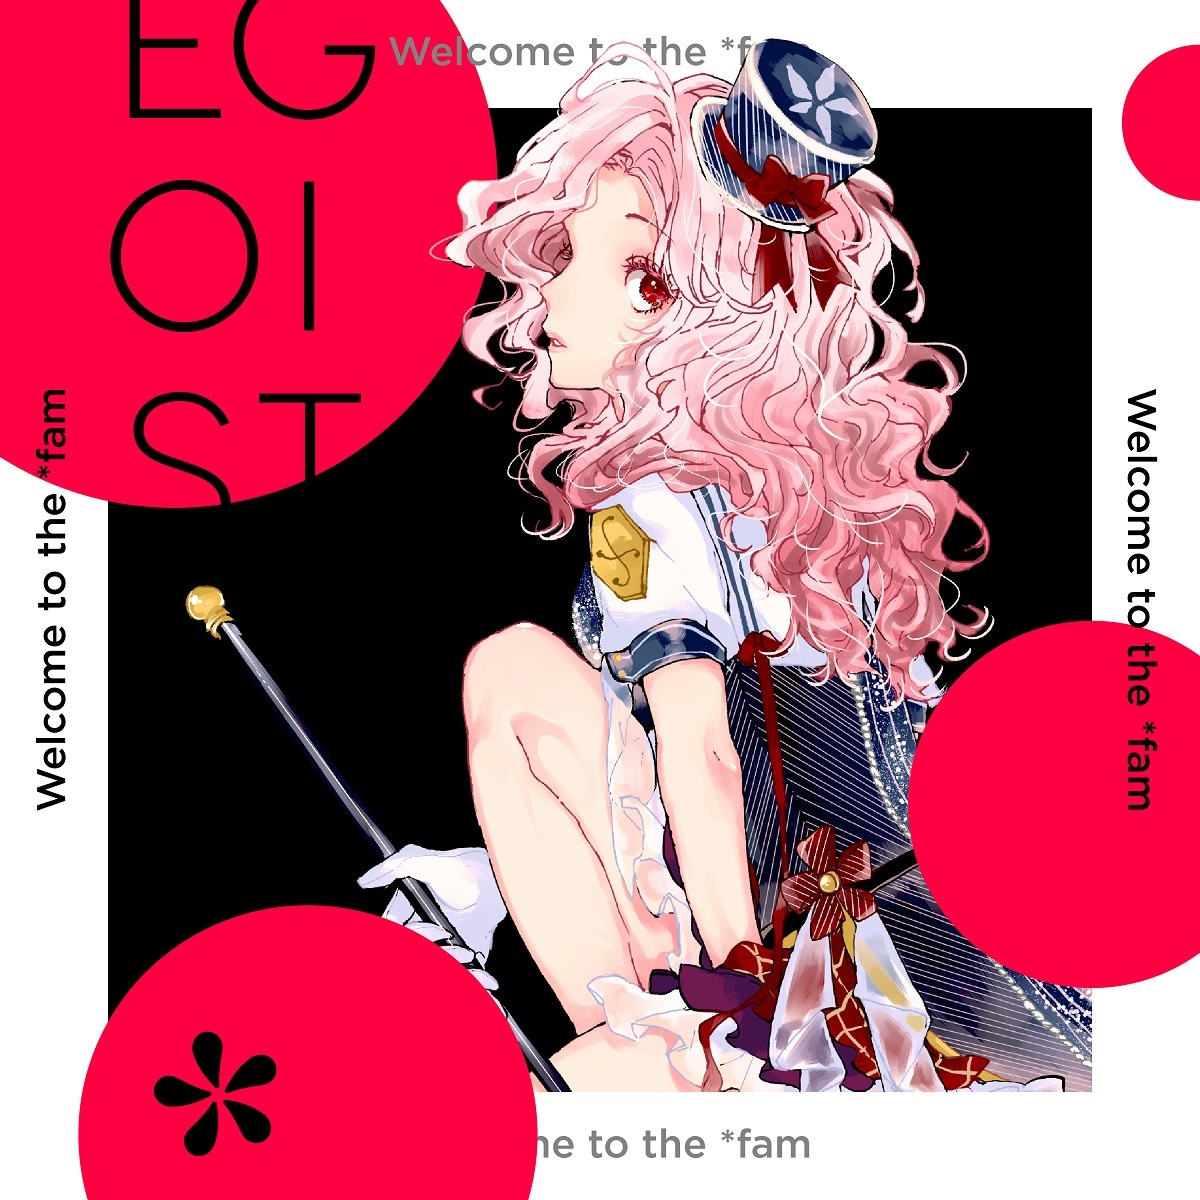 EGOIST「Welcome to the *fam」